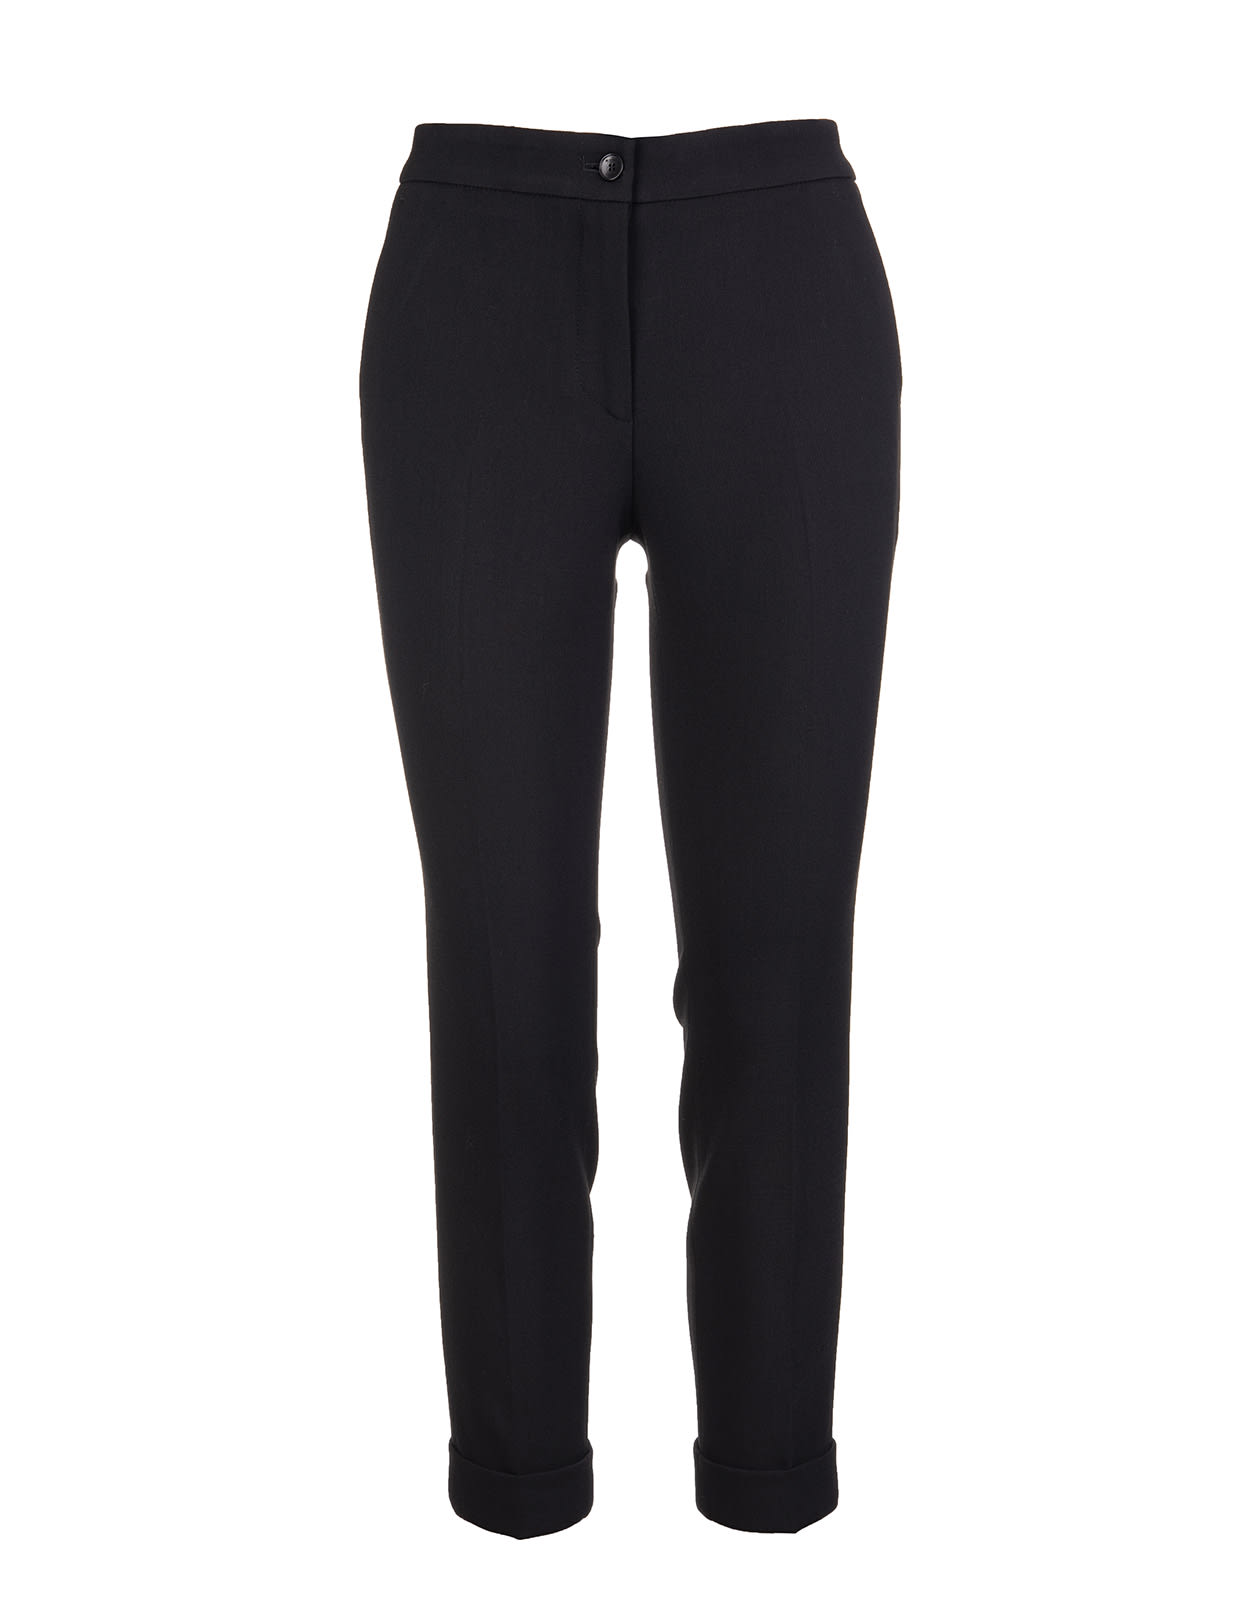 Etro Woman Black Wool Tailored Trousers